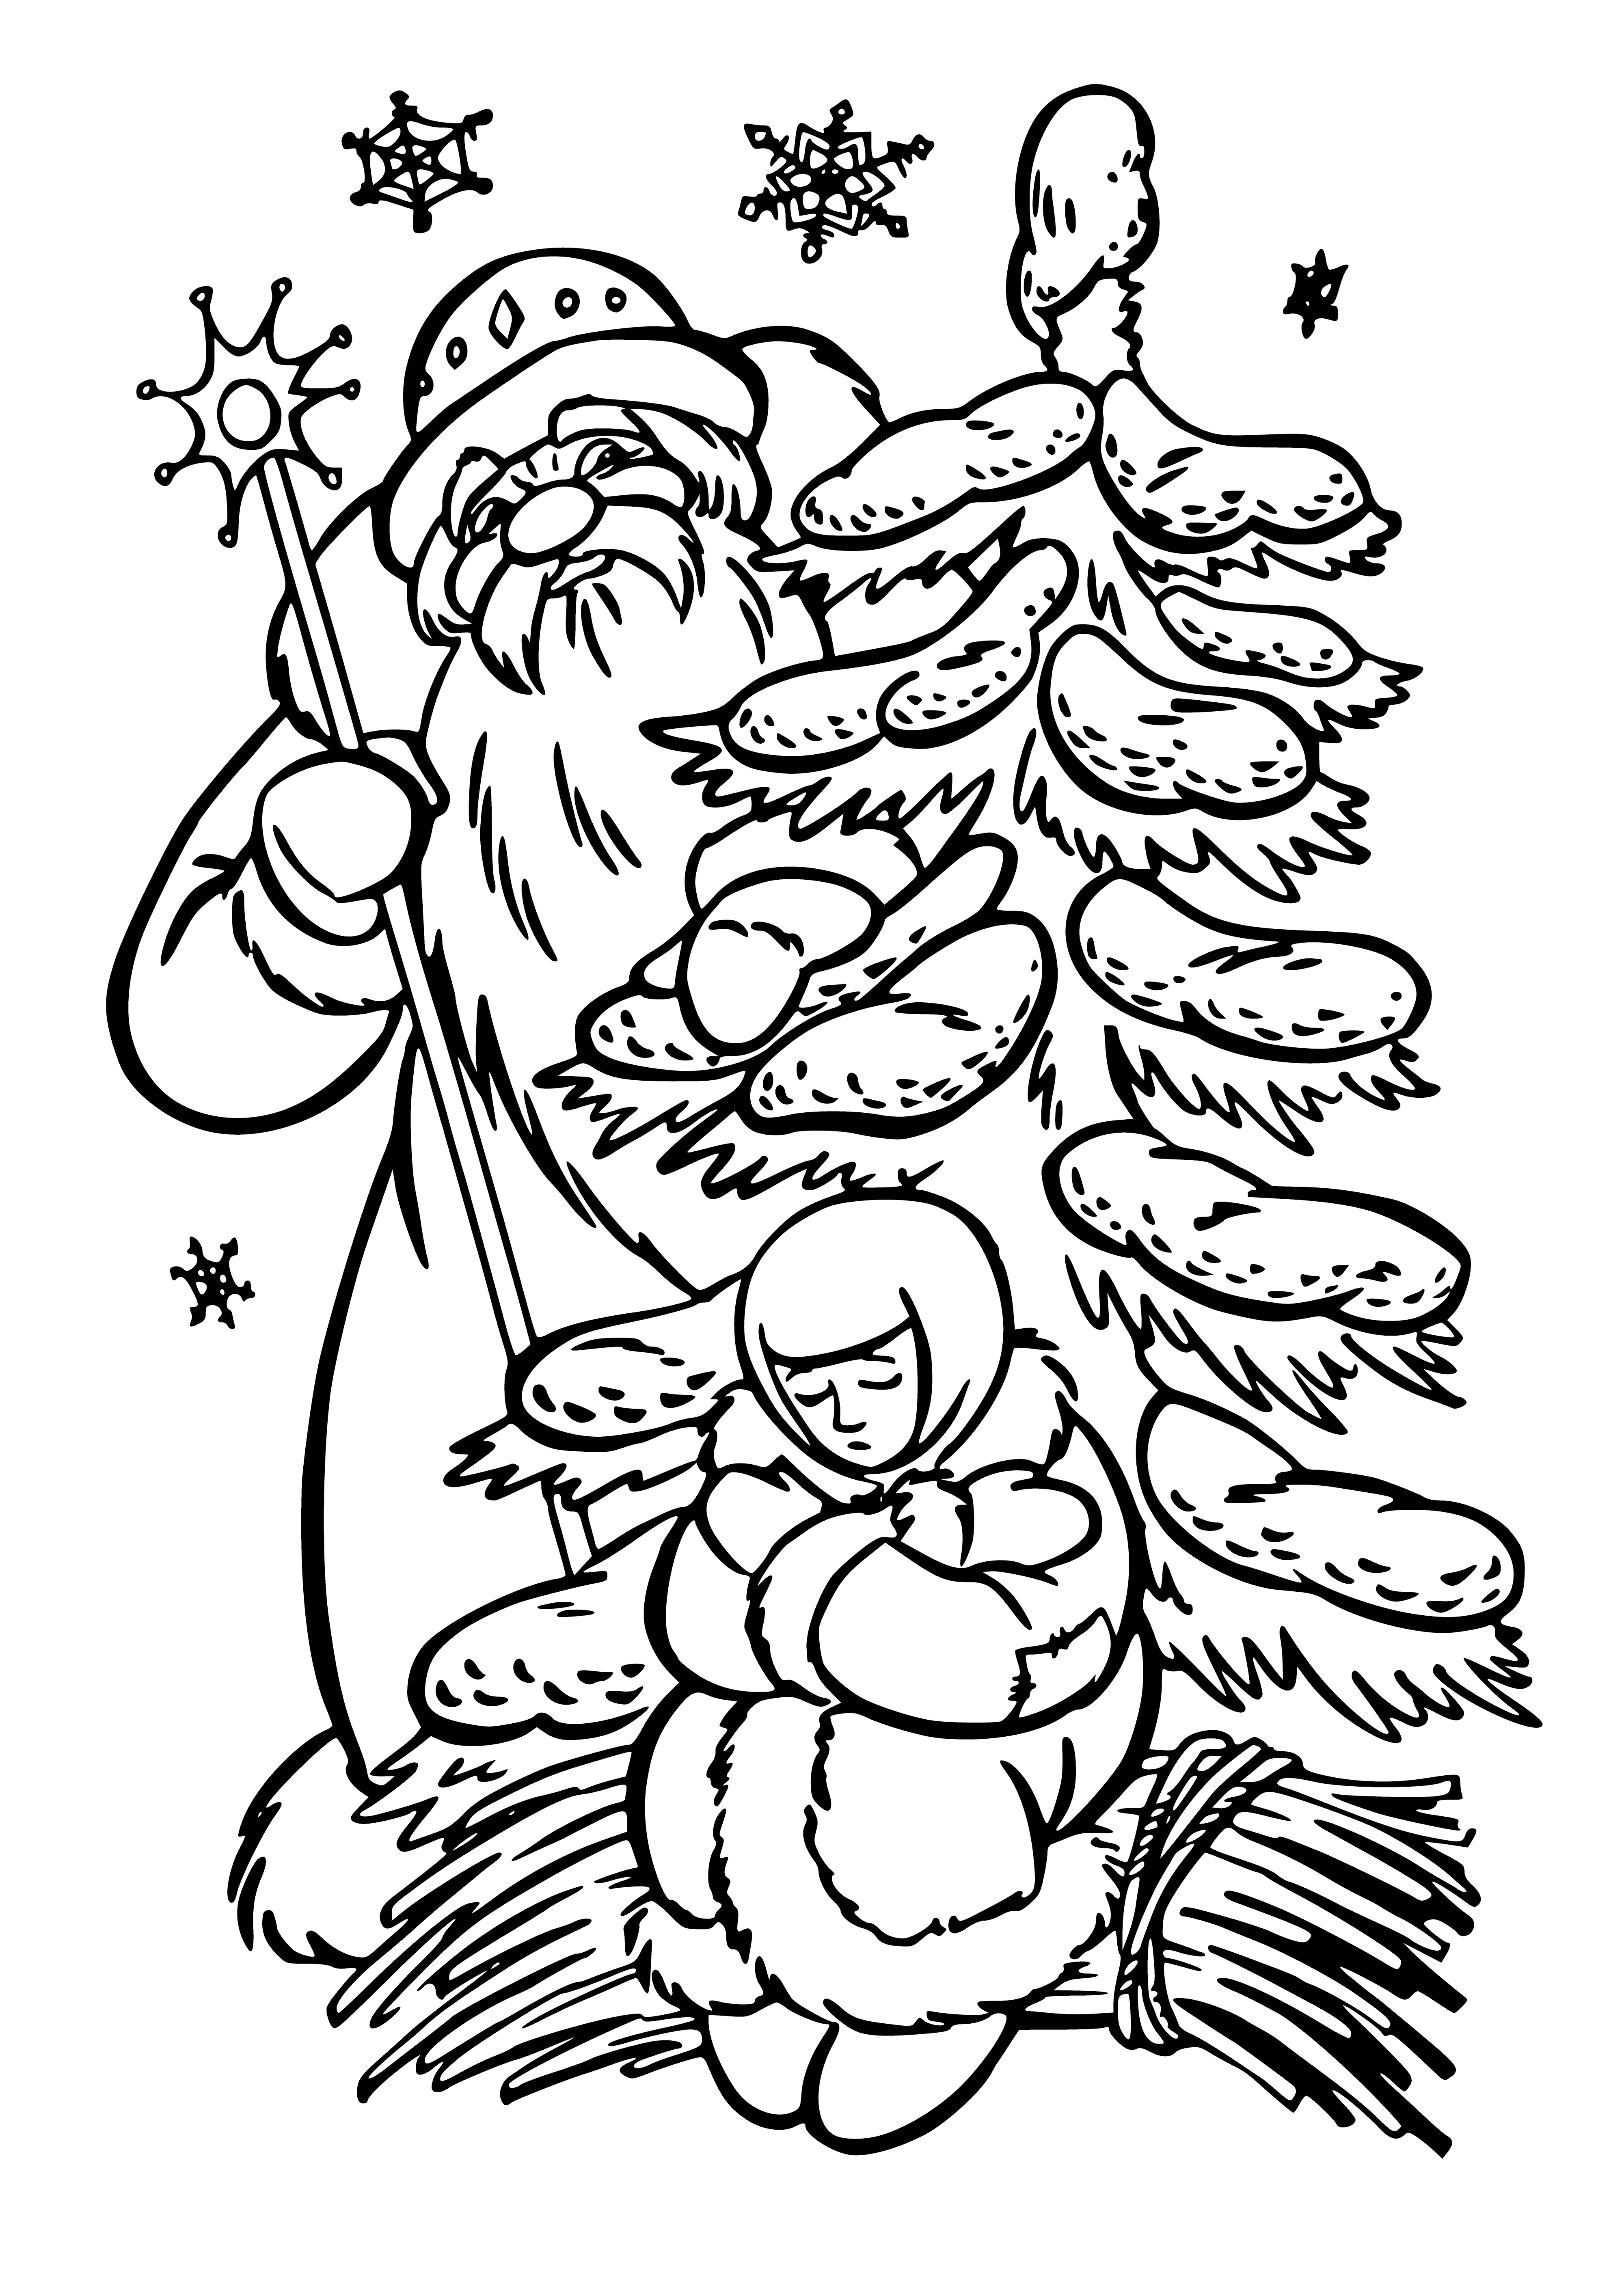 Frosty coloring page